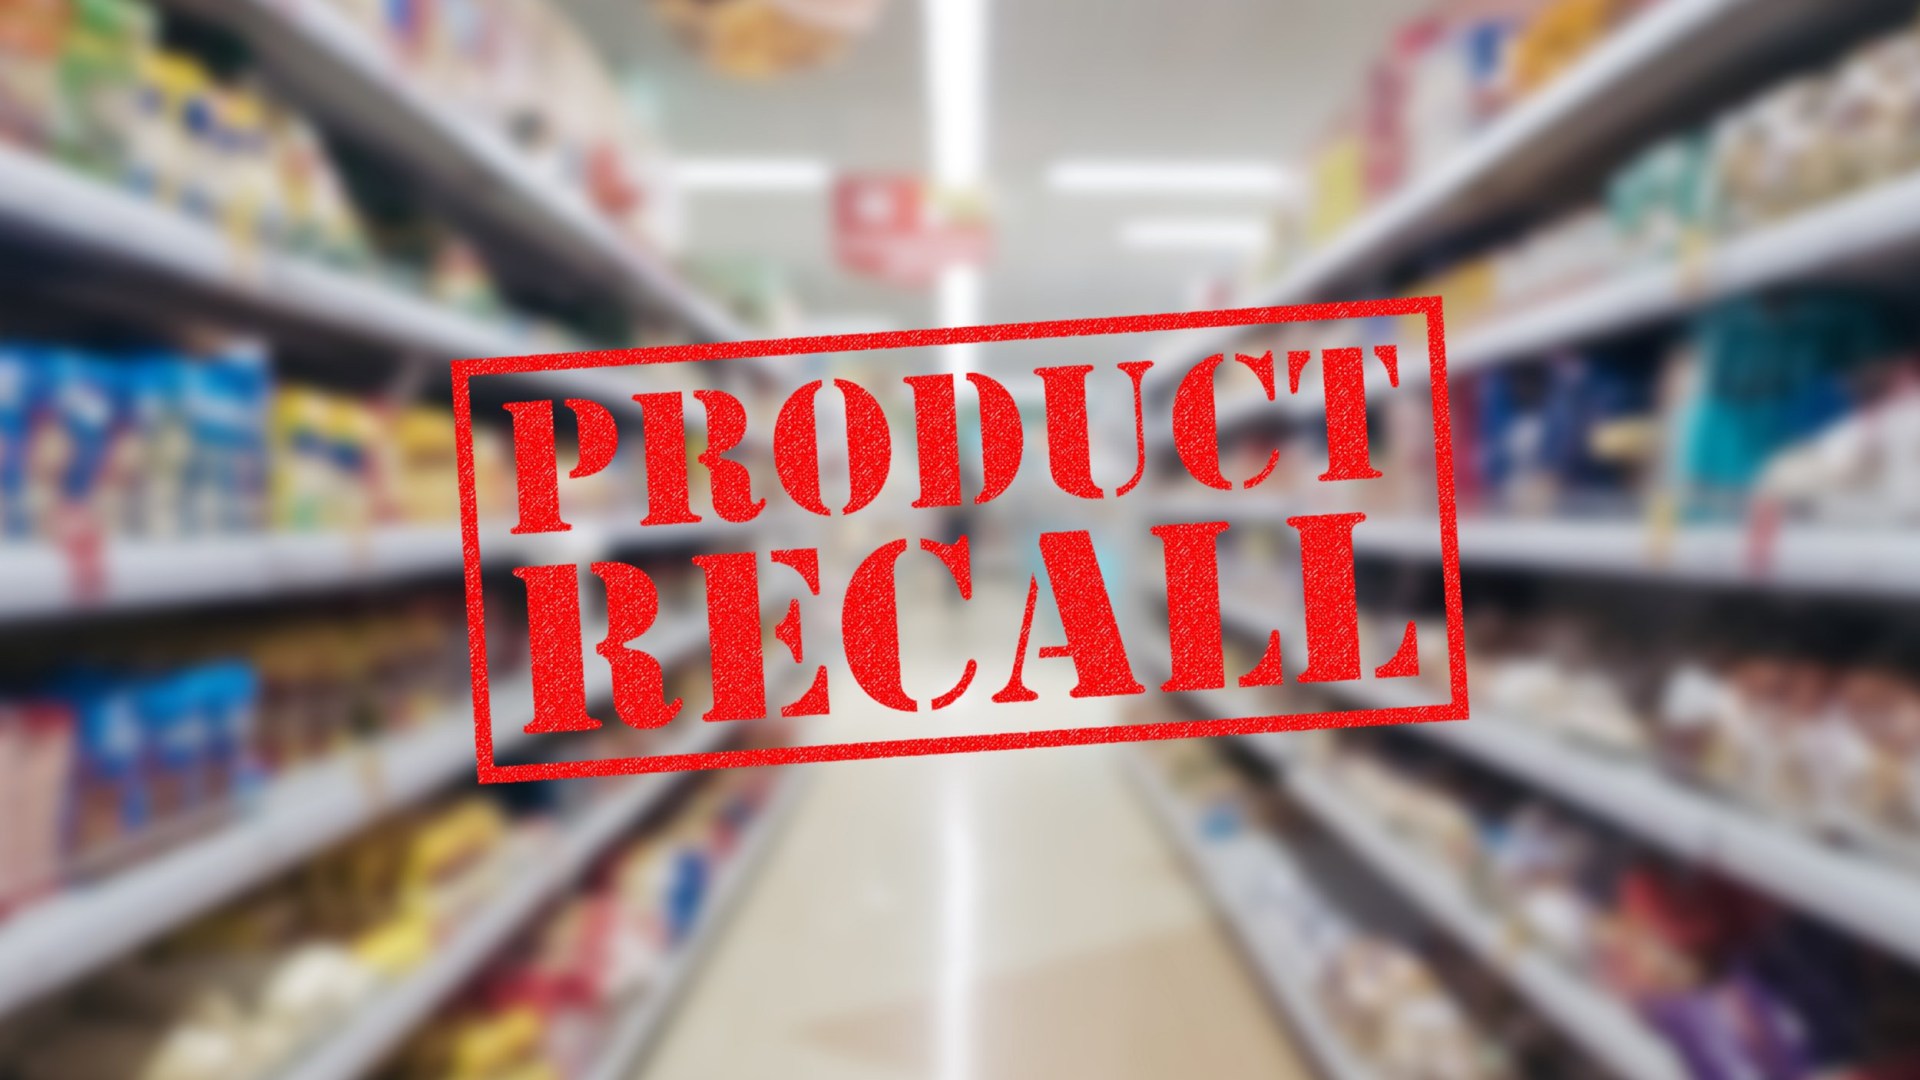 Urgent recall on large number of household staples across popular brands over 